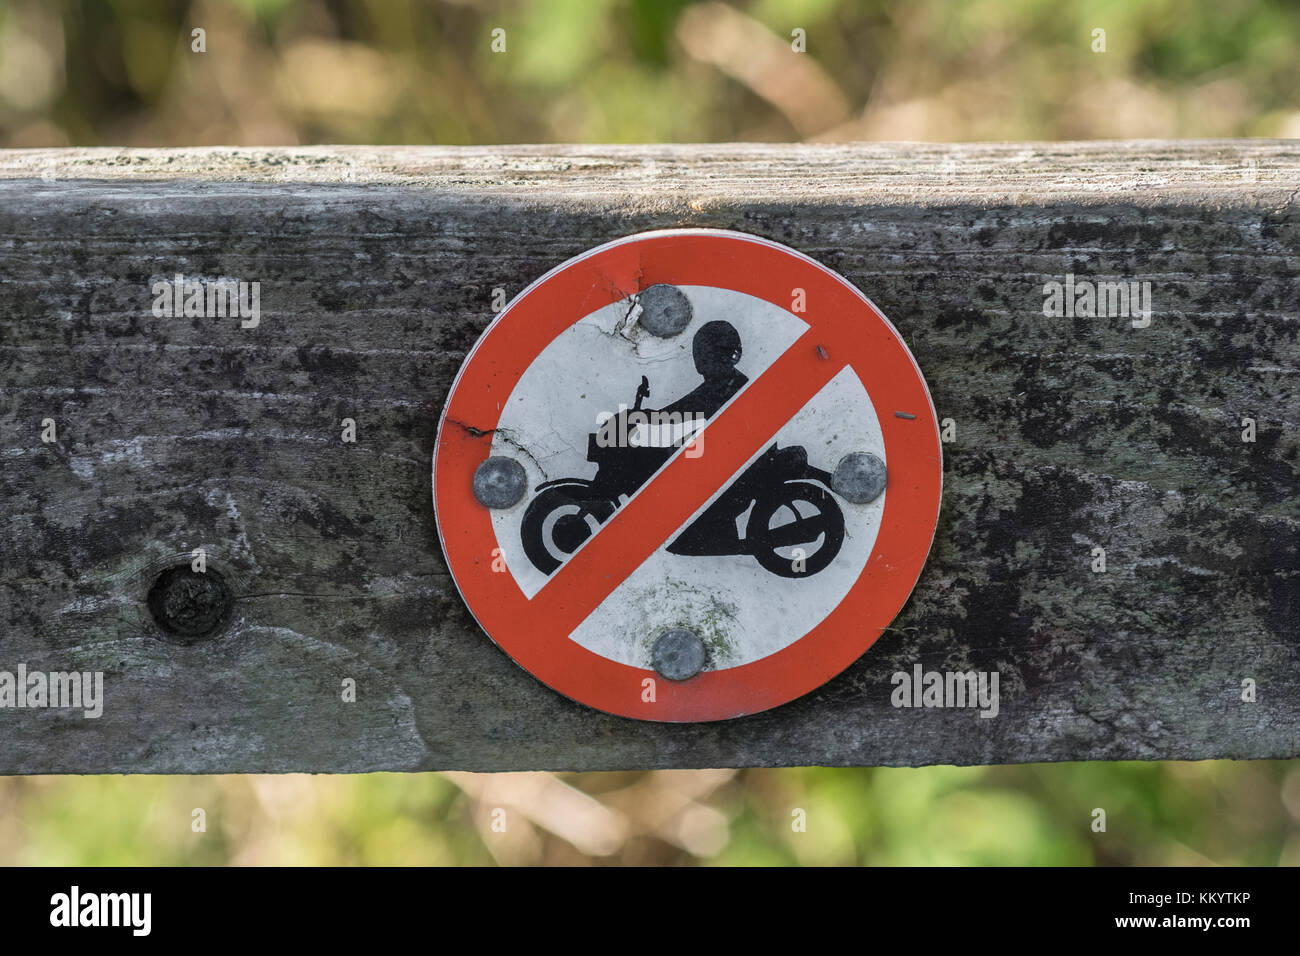 No motorbike access sign on country path in Cornwall, UK. Possible metaphor restricted freedoms, Hells Angels motorbike culture, stay on right path. Stock Photo